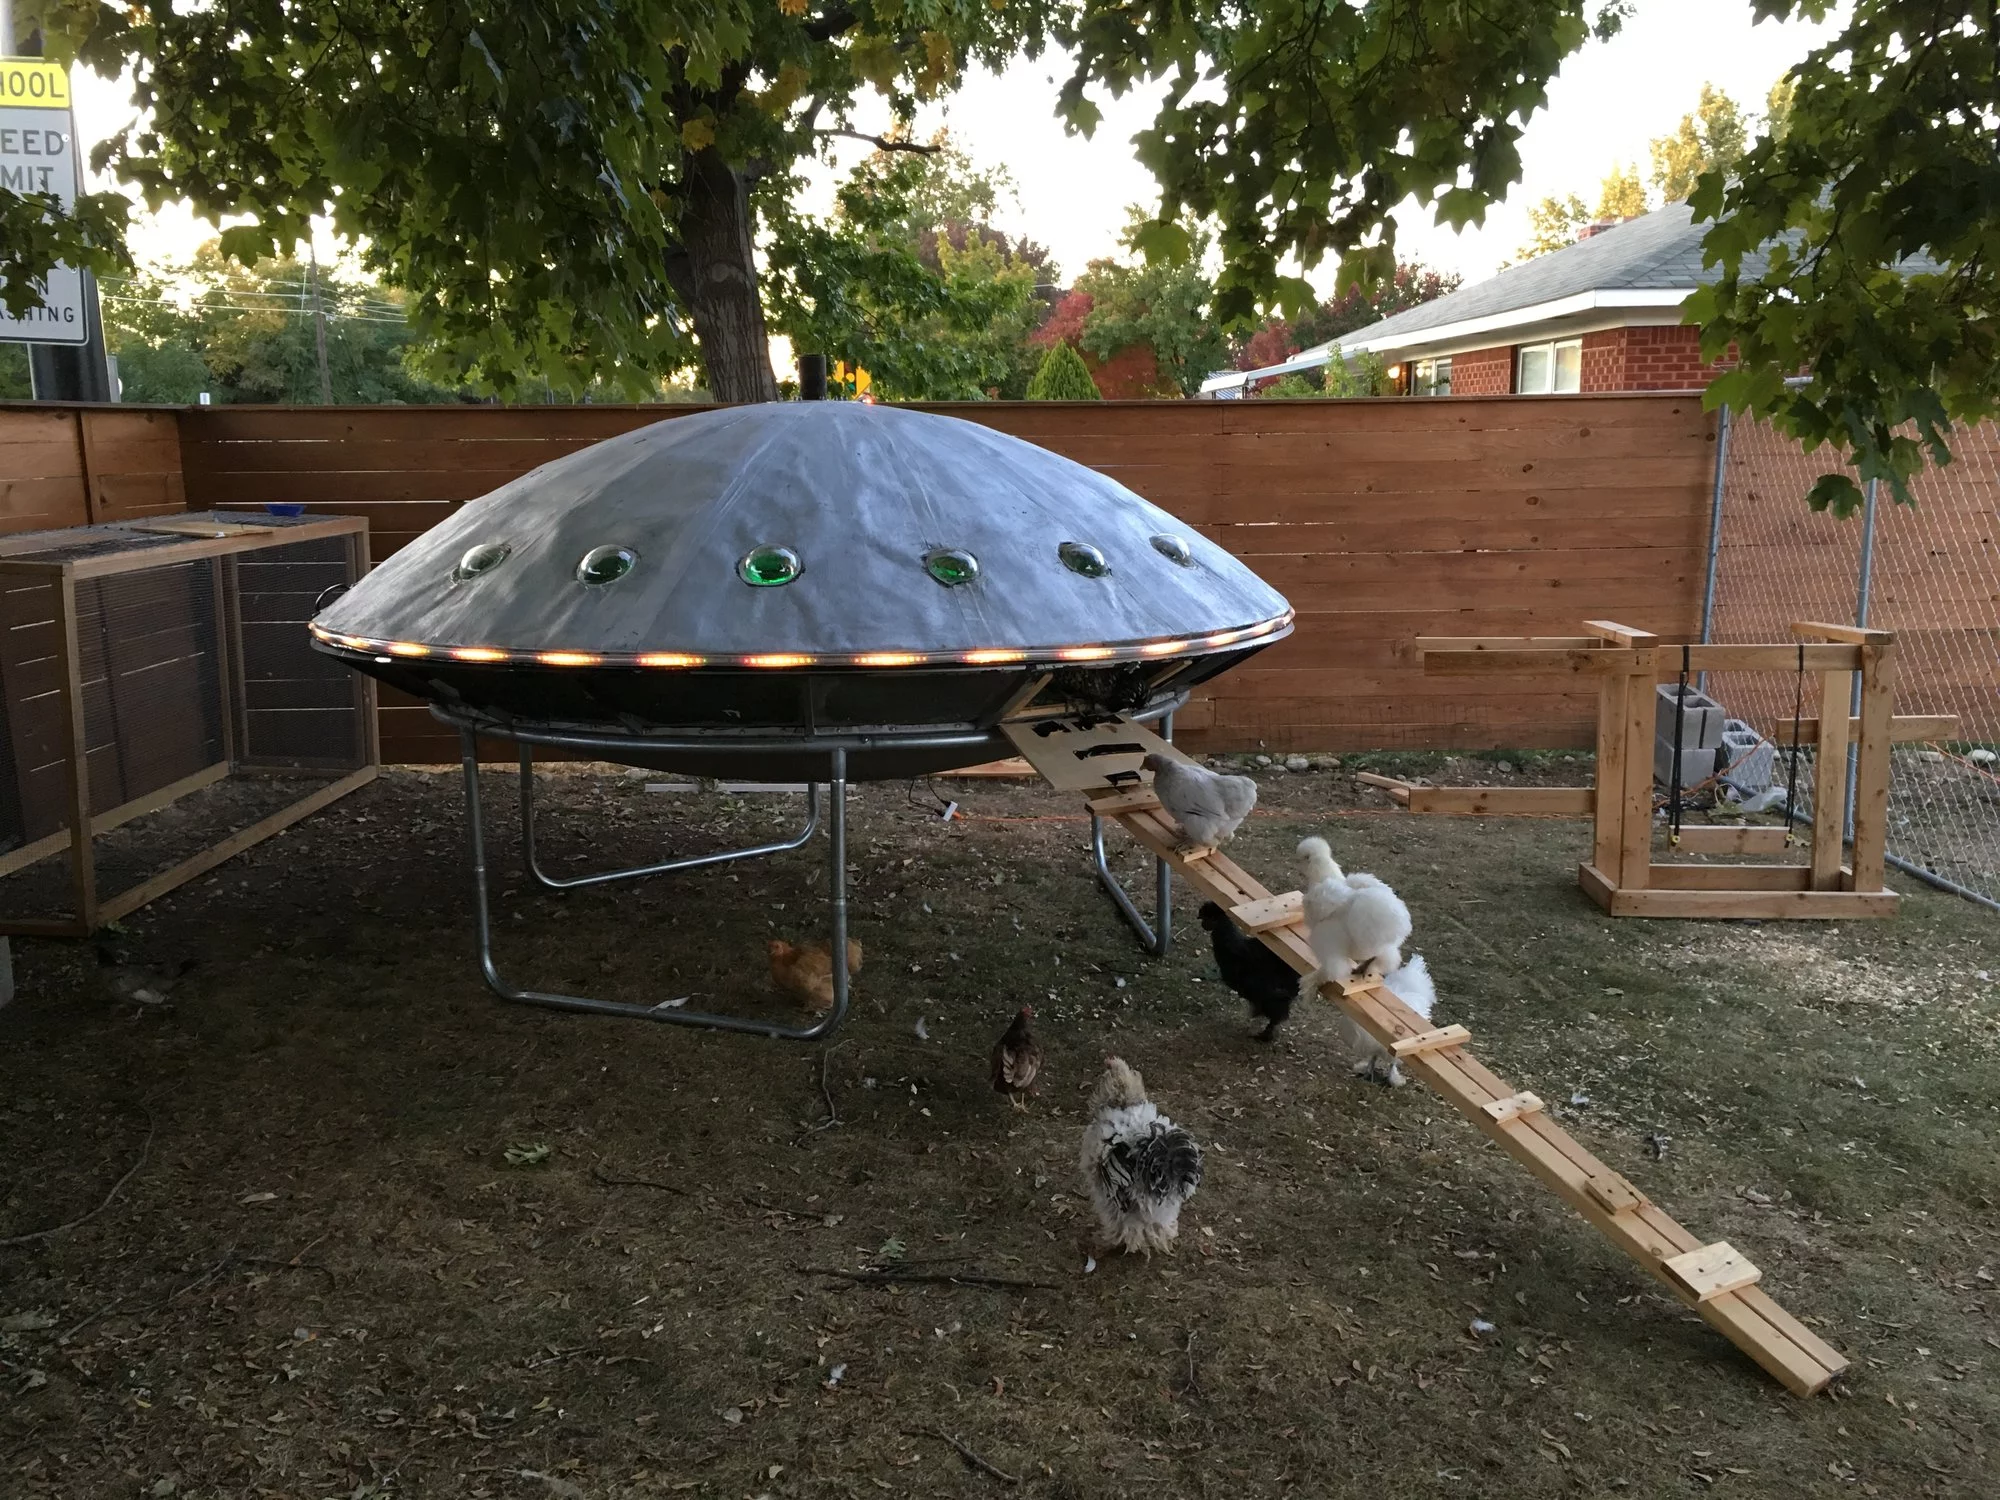 Alien-Obsessed Idaho Couple Builds UFO-Shaped Chicken Coop